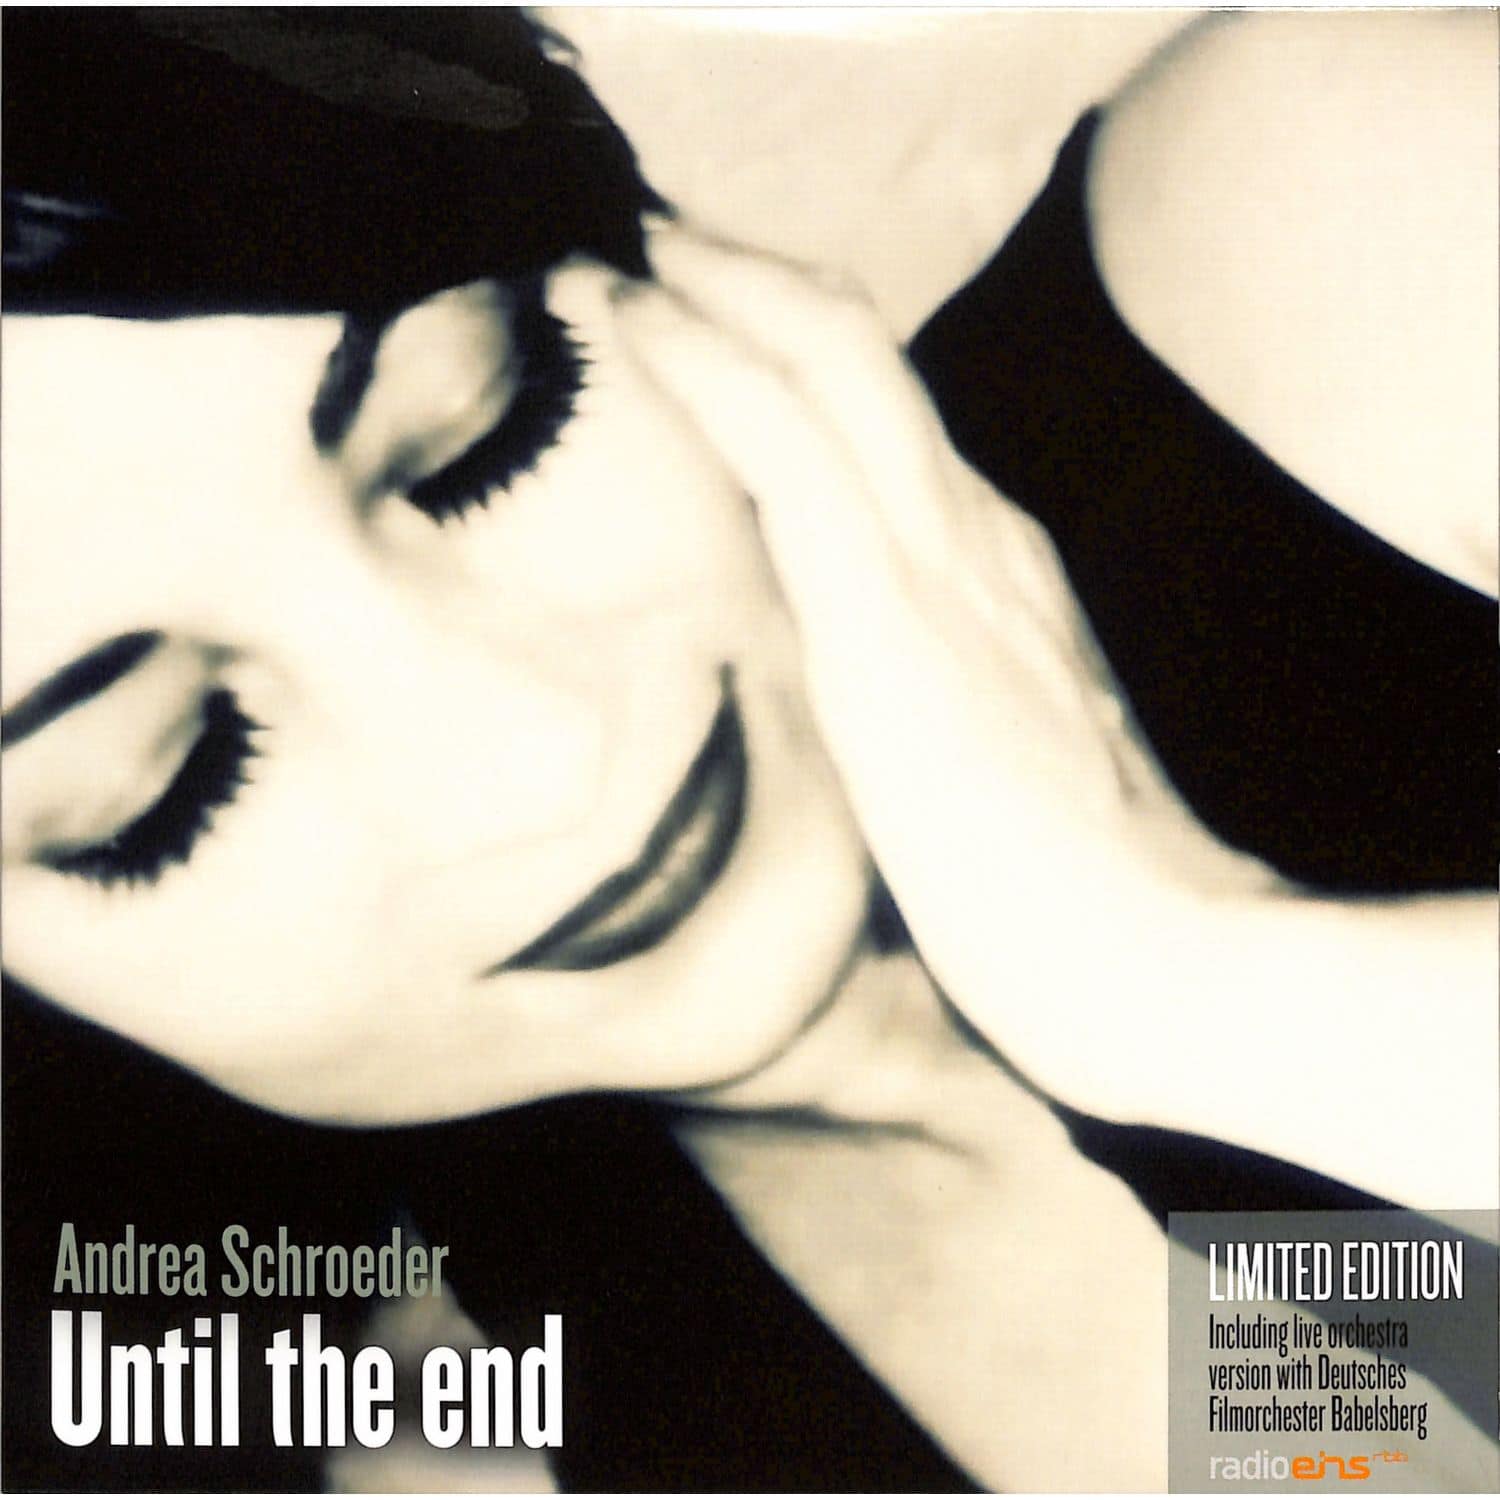 Andrea Schroeder - UNTIL THE END 